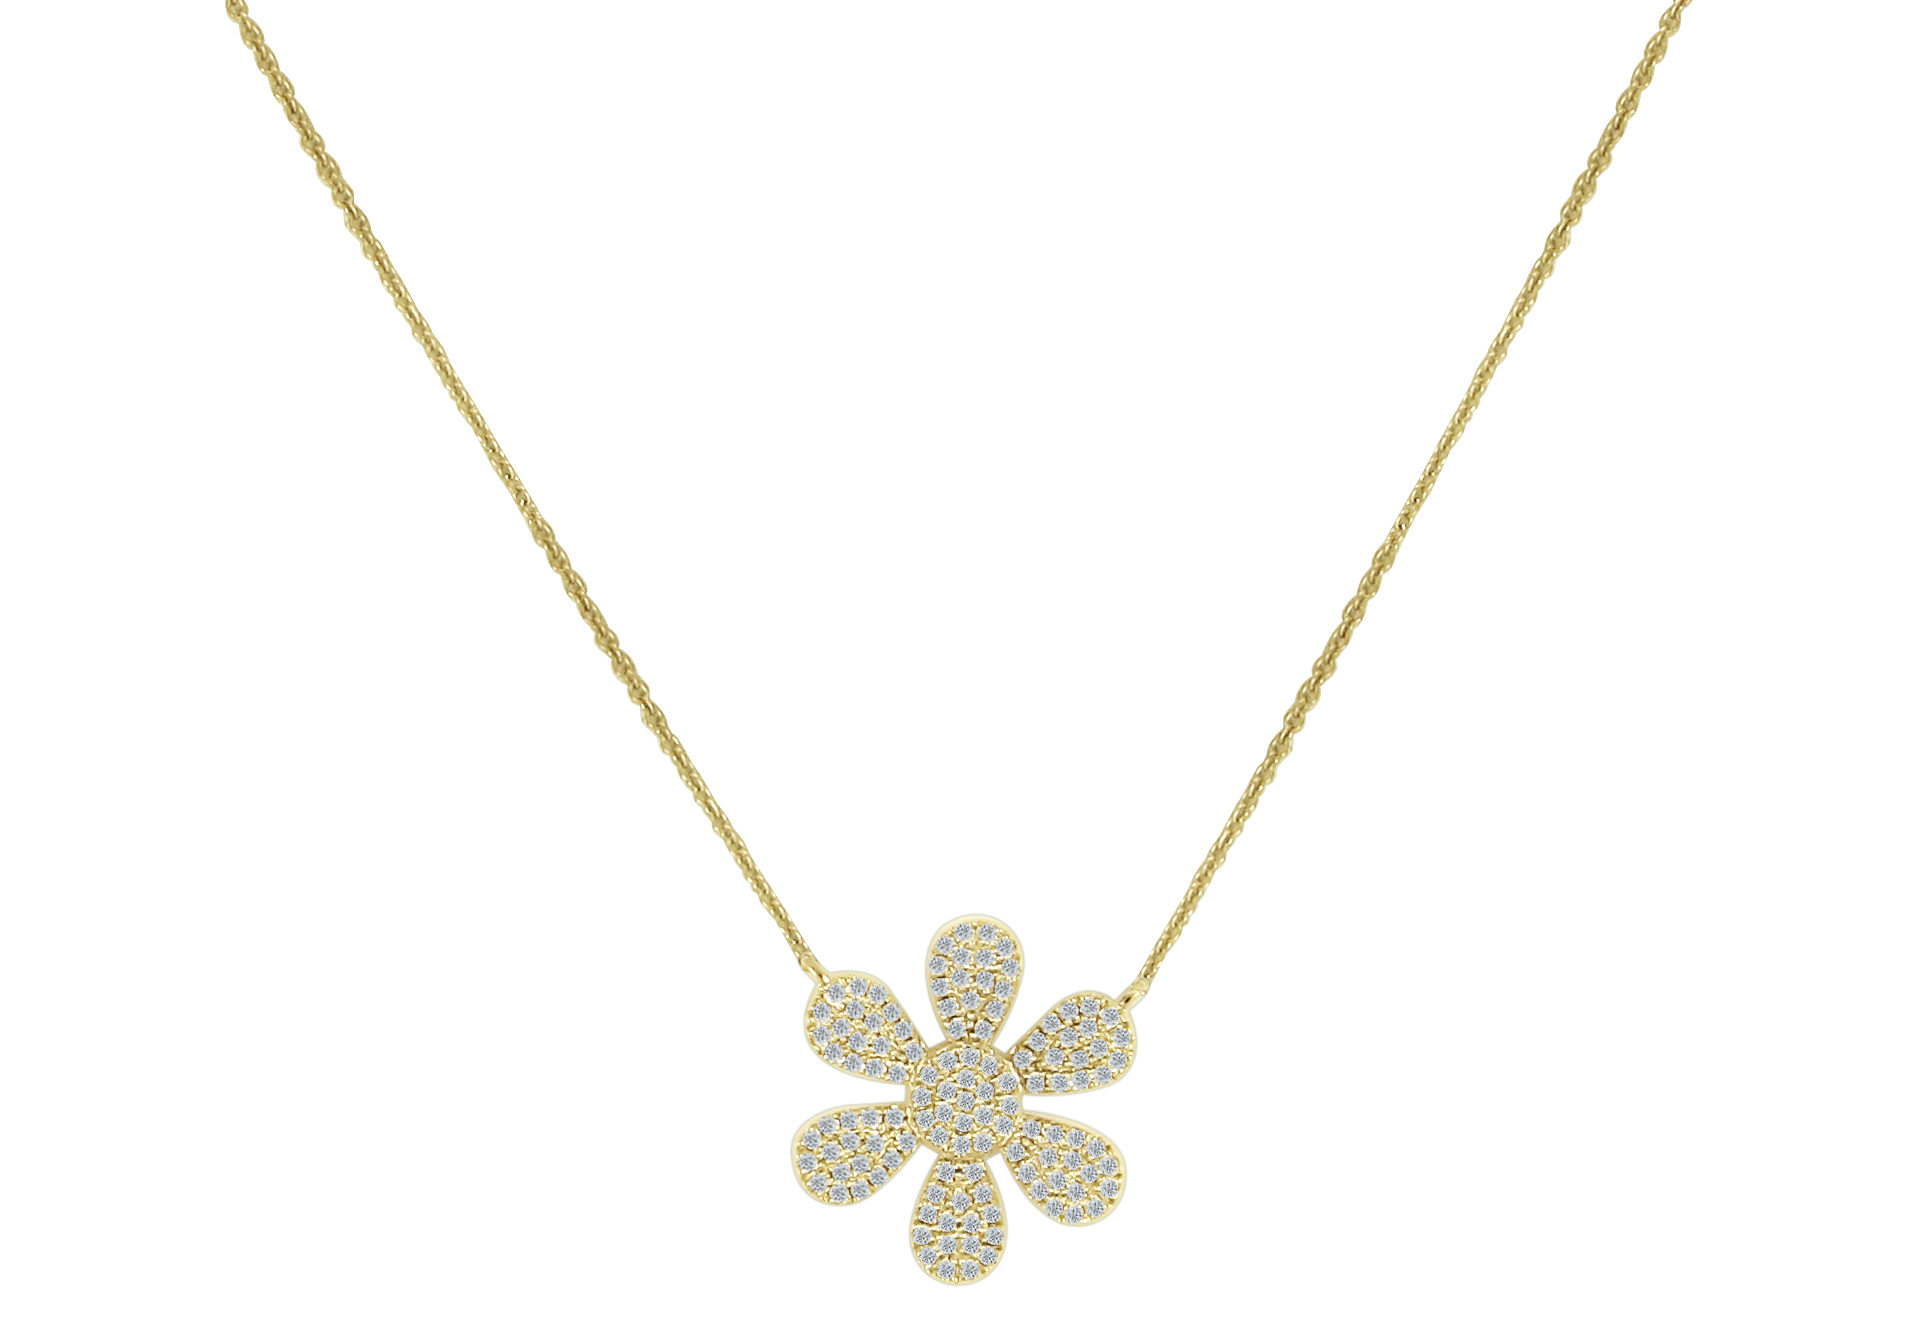 Necklace image